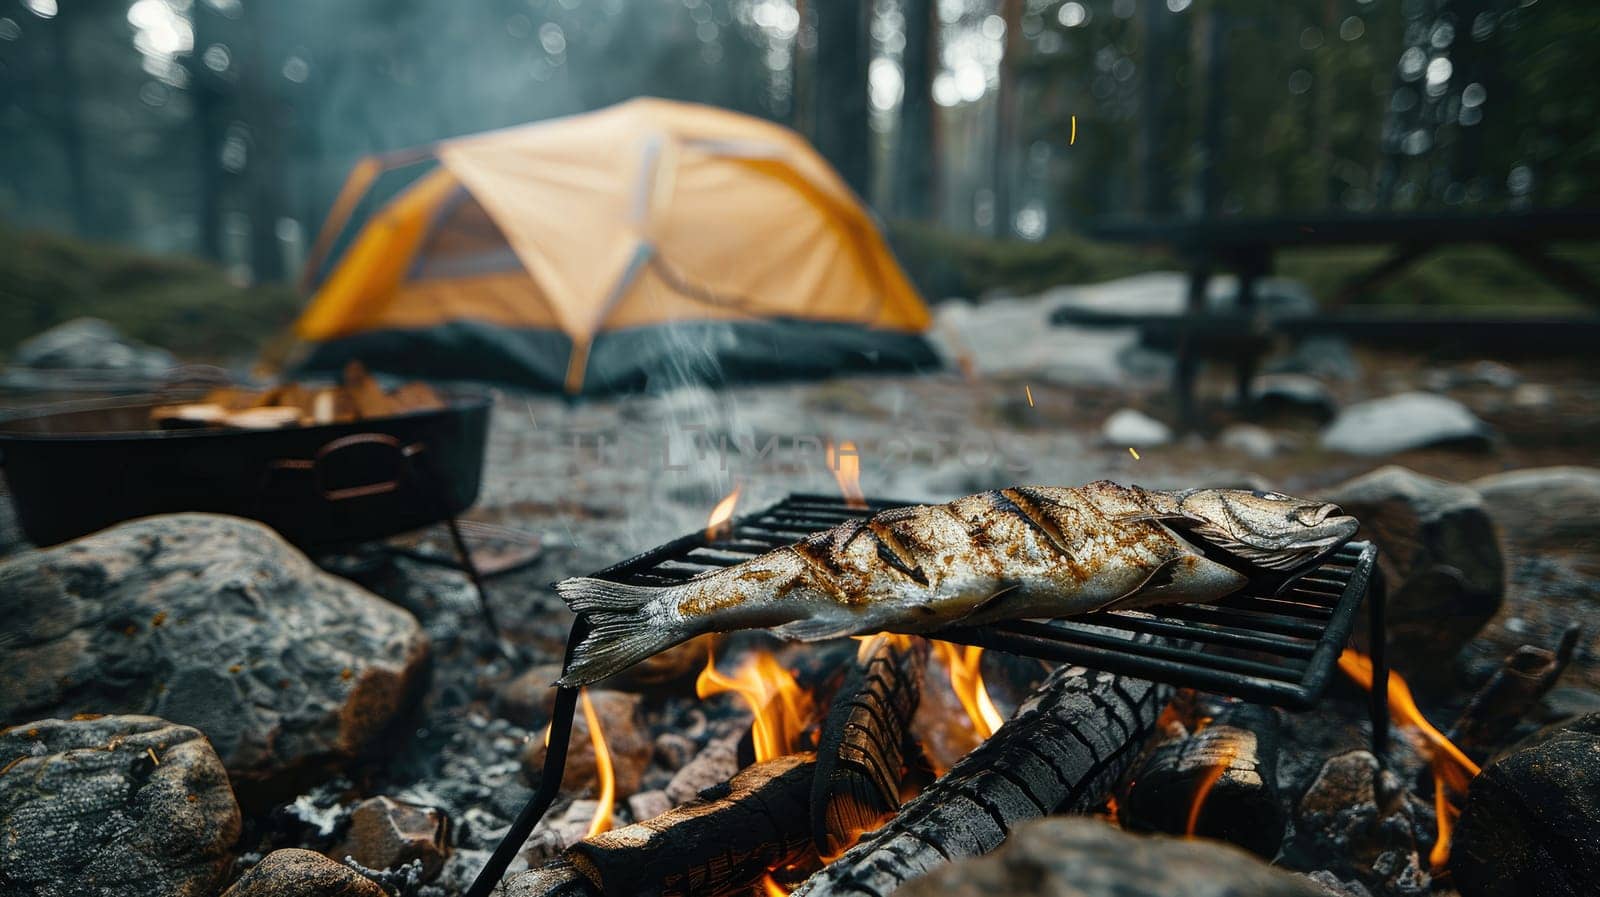 Roasting a fish at campfire, Evening campfire, Outdoor kitchen and camping area in the forest.